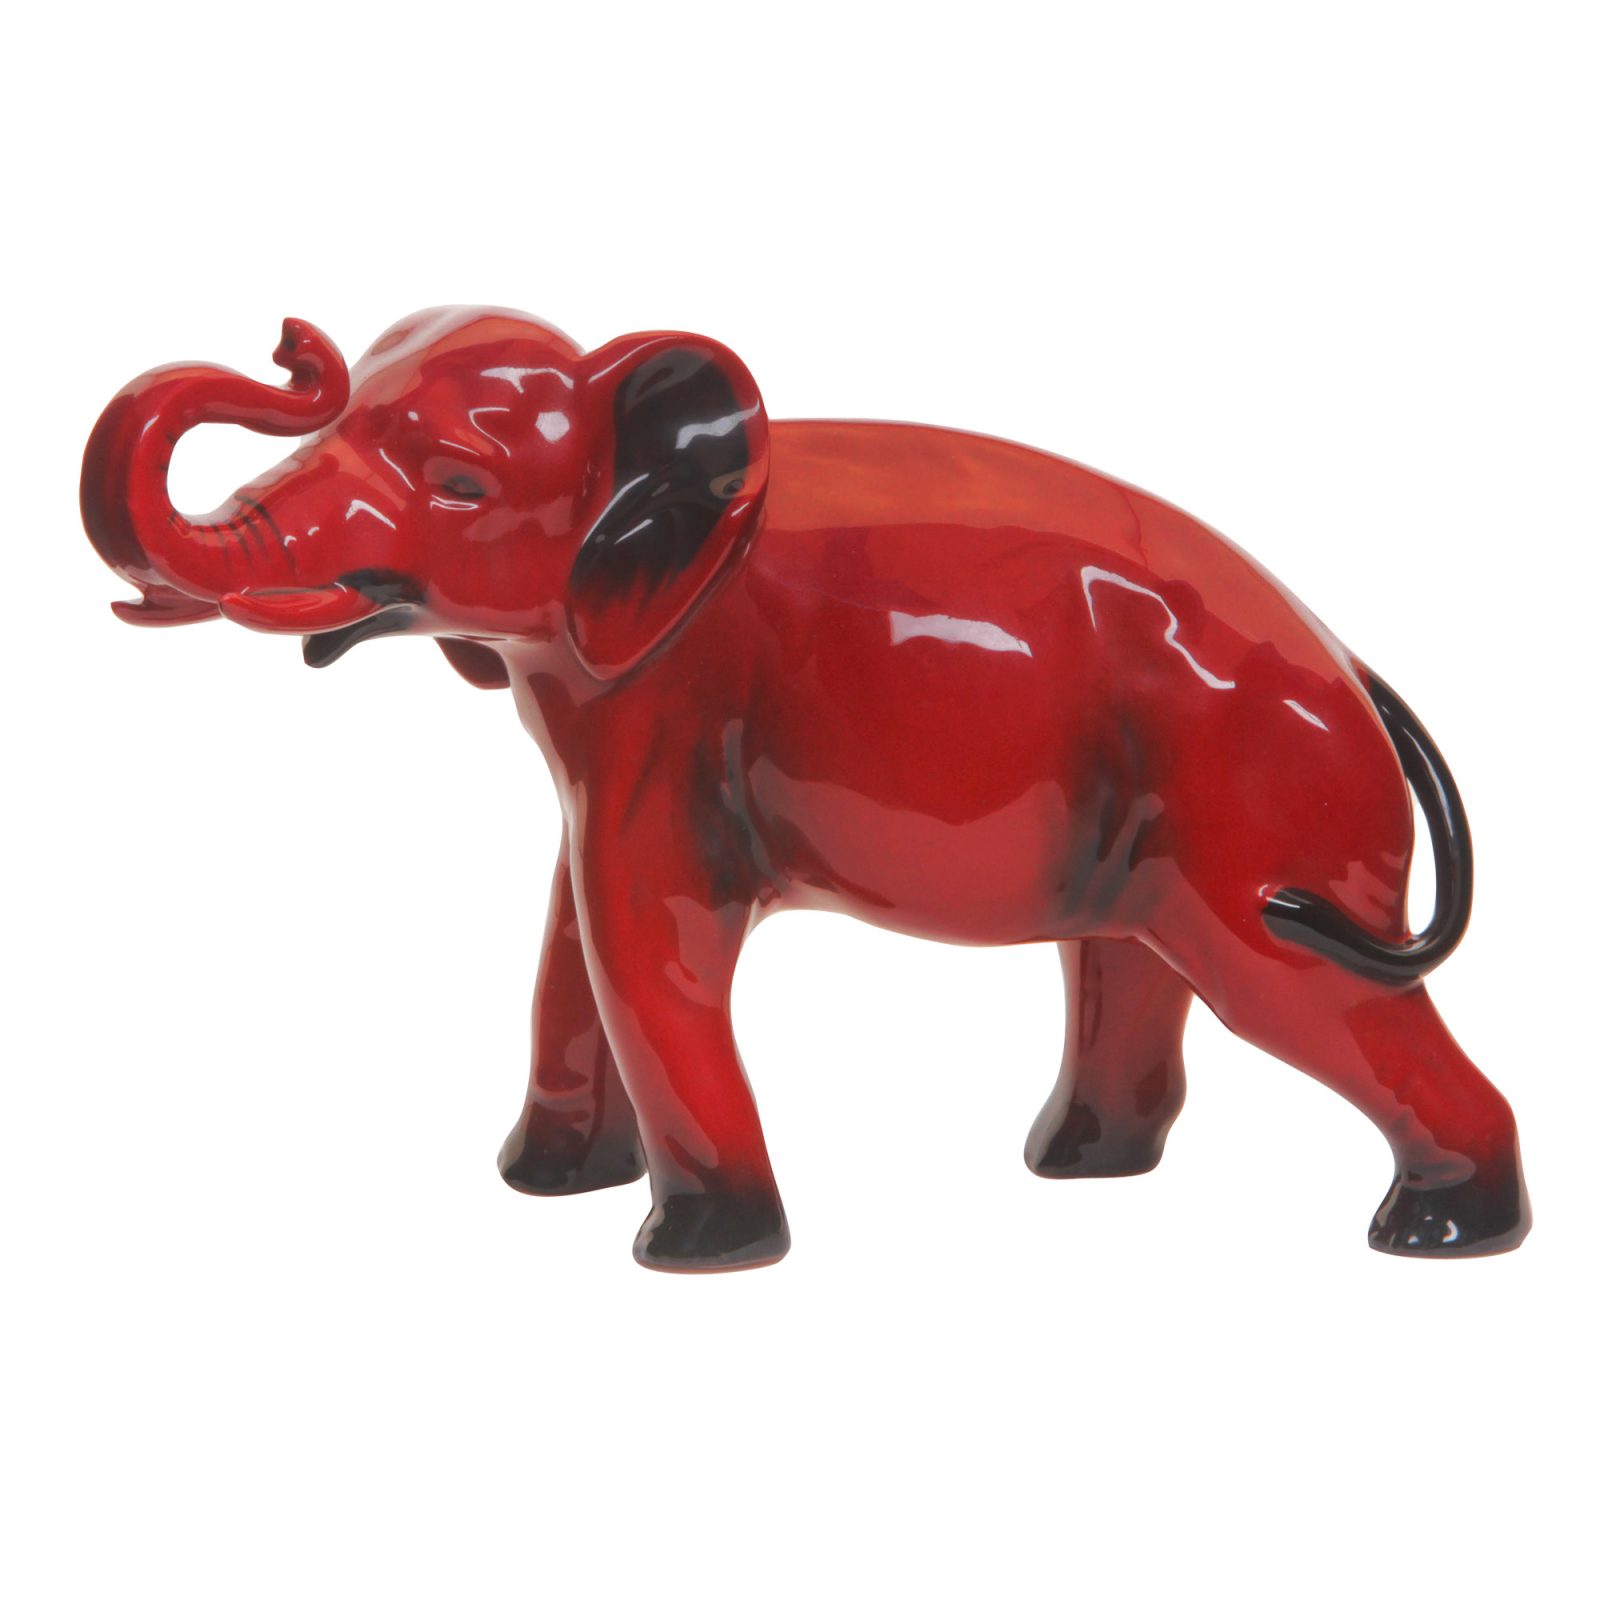 Elephant Trunk in Salute - Small - Royal Doulton Flambe